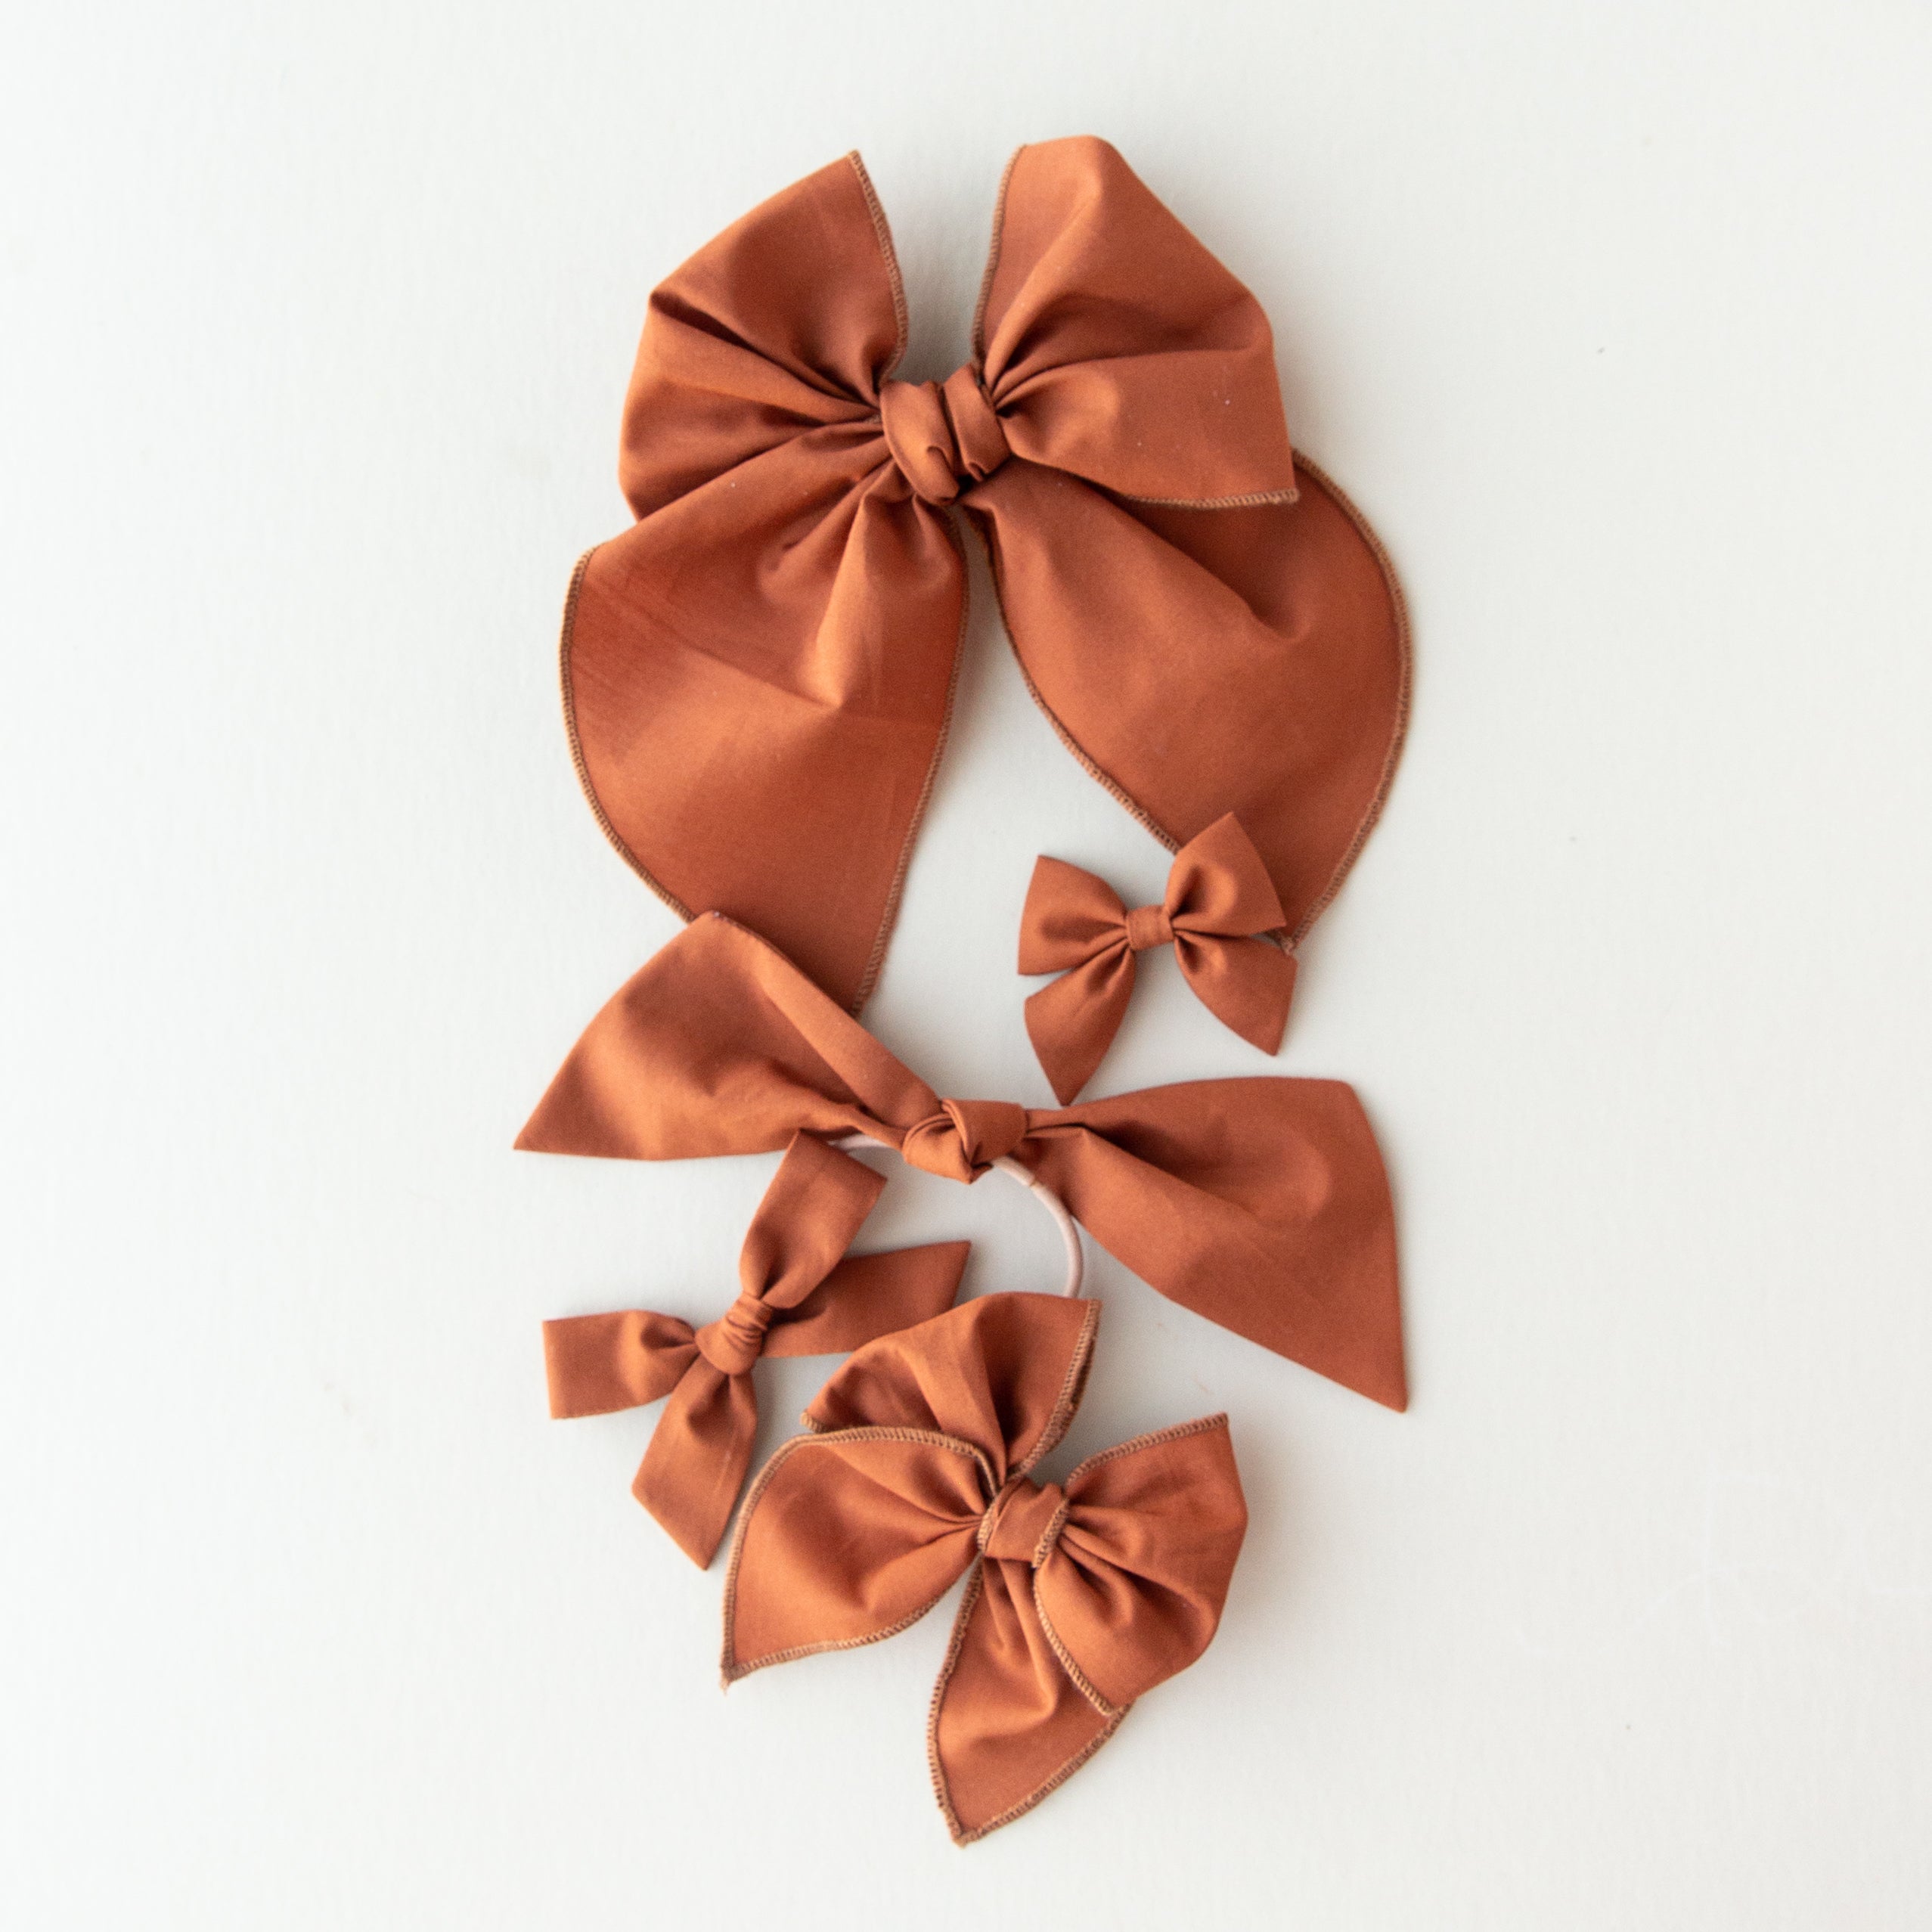 Raw Sienna | Pigtail Set - Hand-tied Bow